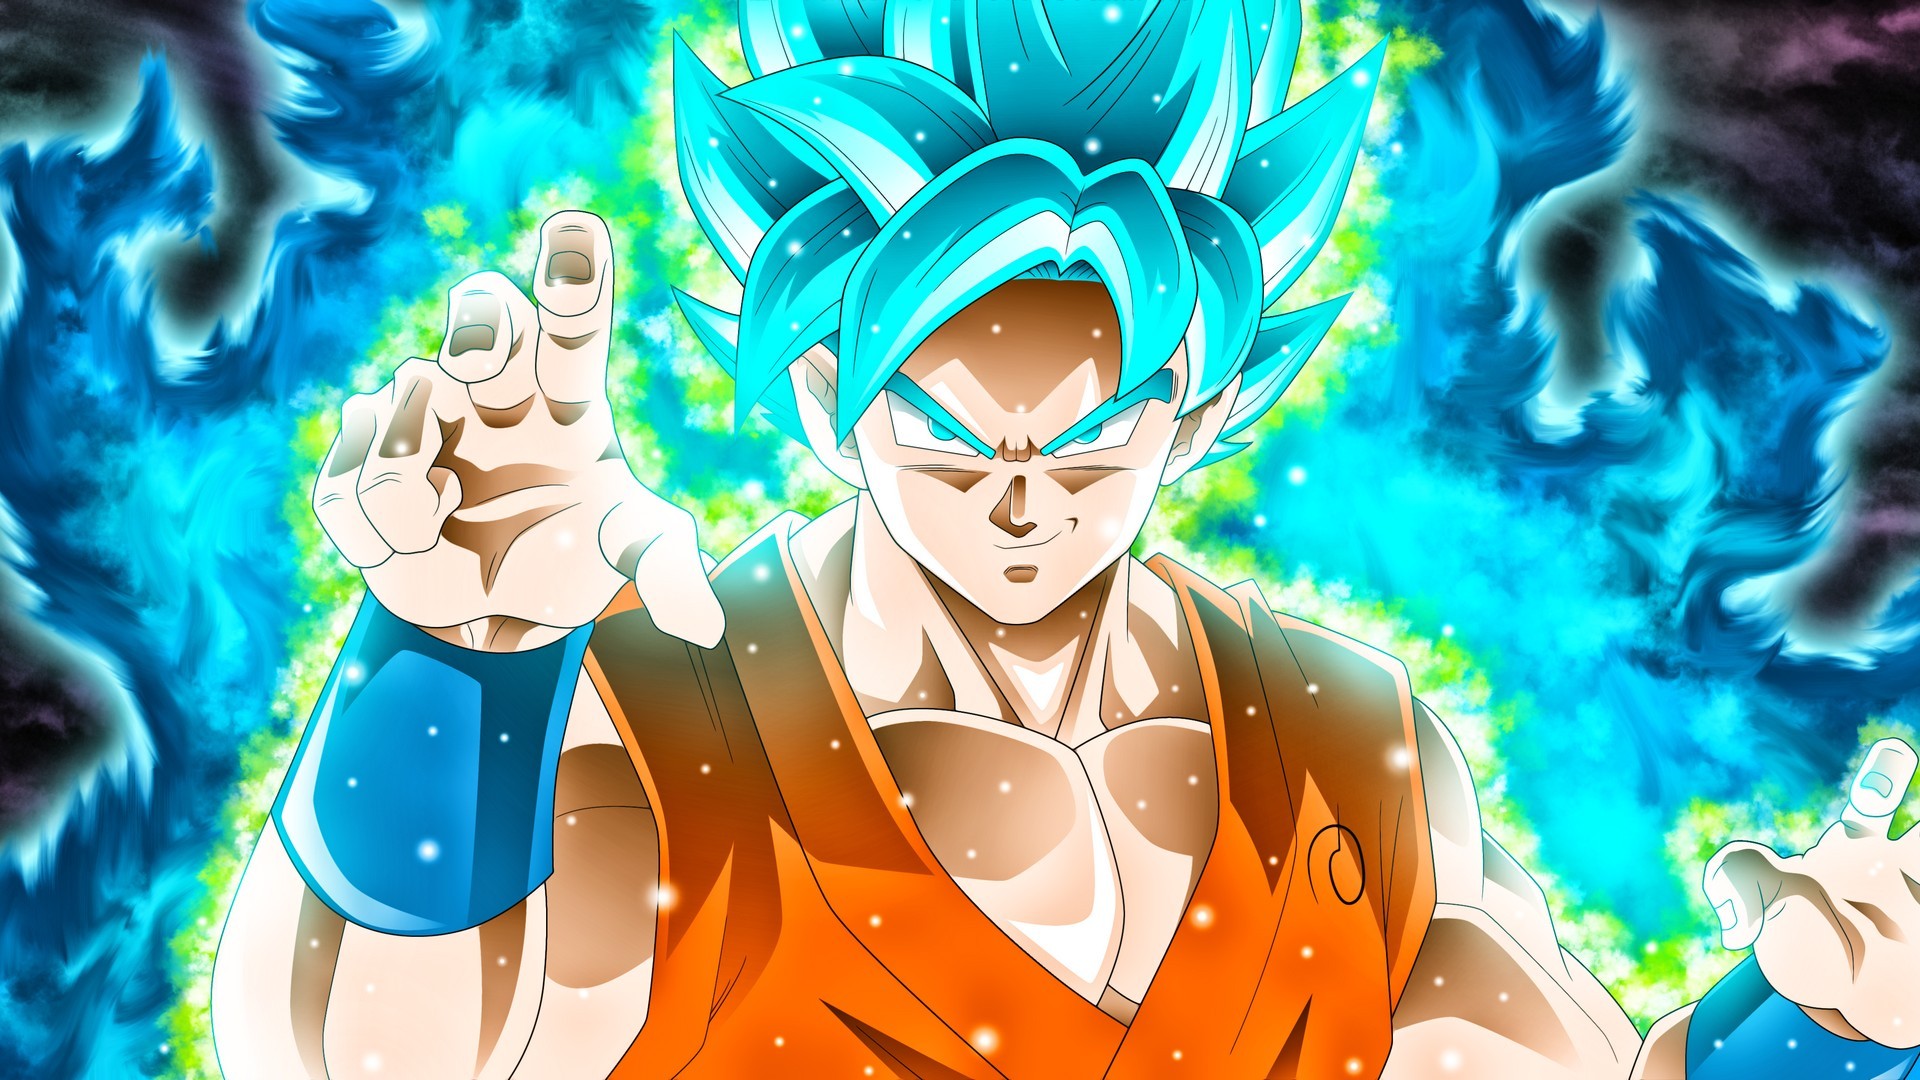 Goku SSJ Blue Wallpaper For Desktop with image resolution 1920x1080 pixel. You can use this wallpaper as background for your desktop Computer Screensavers, Android or iPhone smartphones